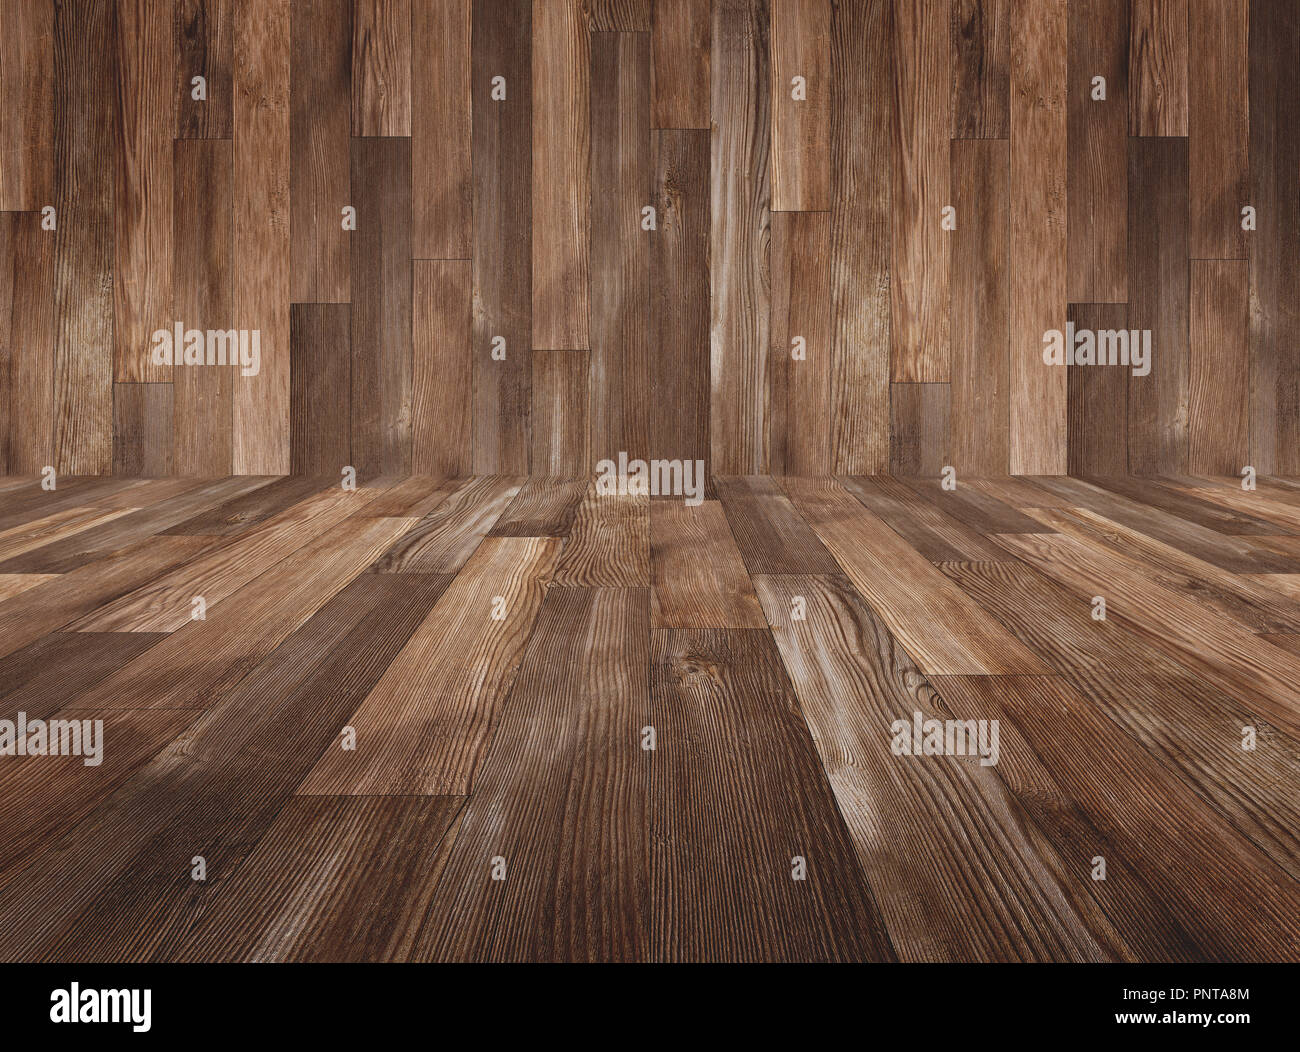 Wood texture background, wood panels wall and floor for backgrounds Stock Photo